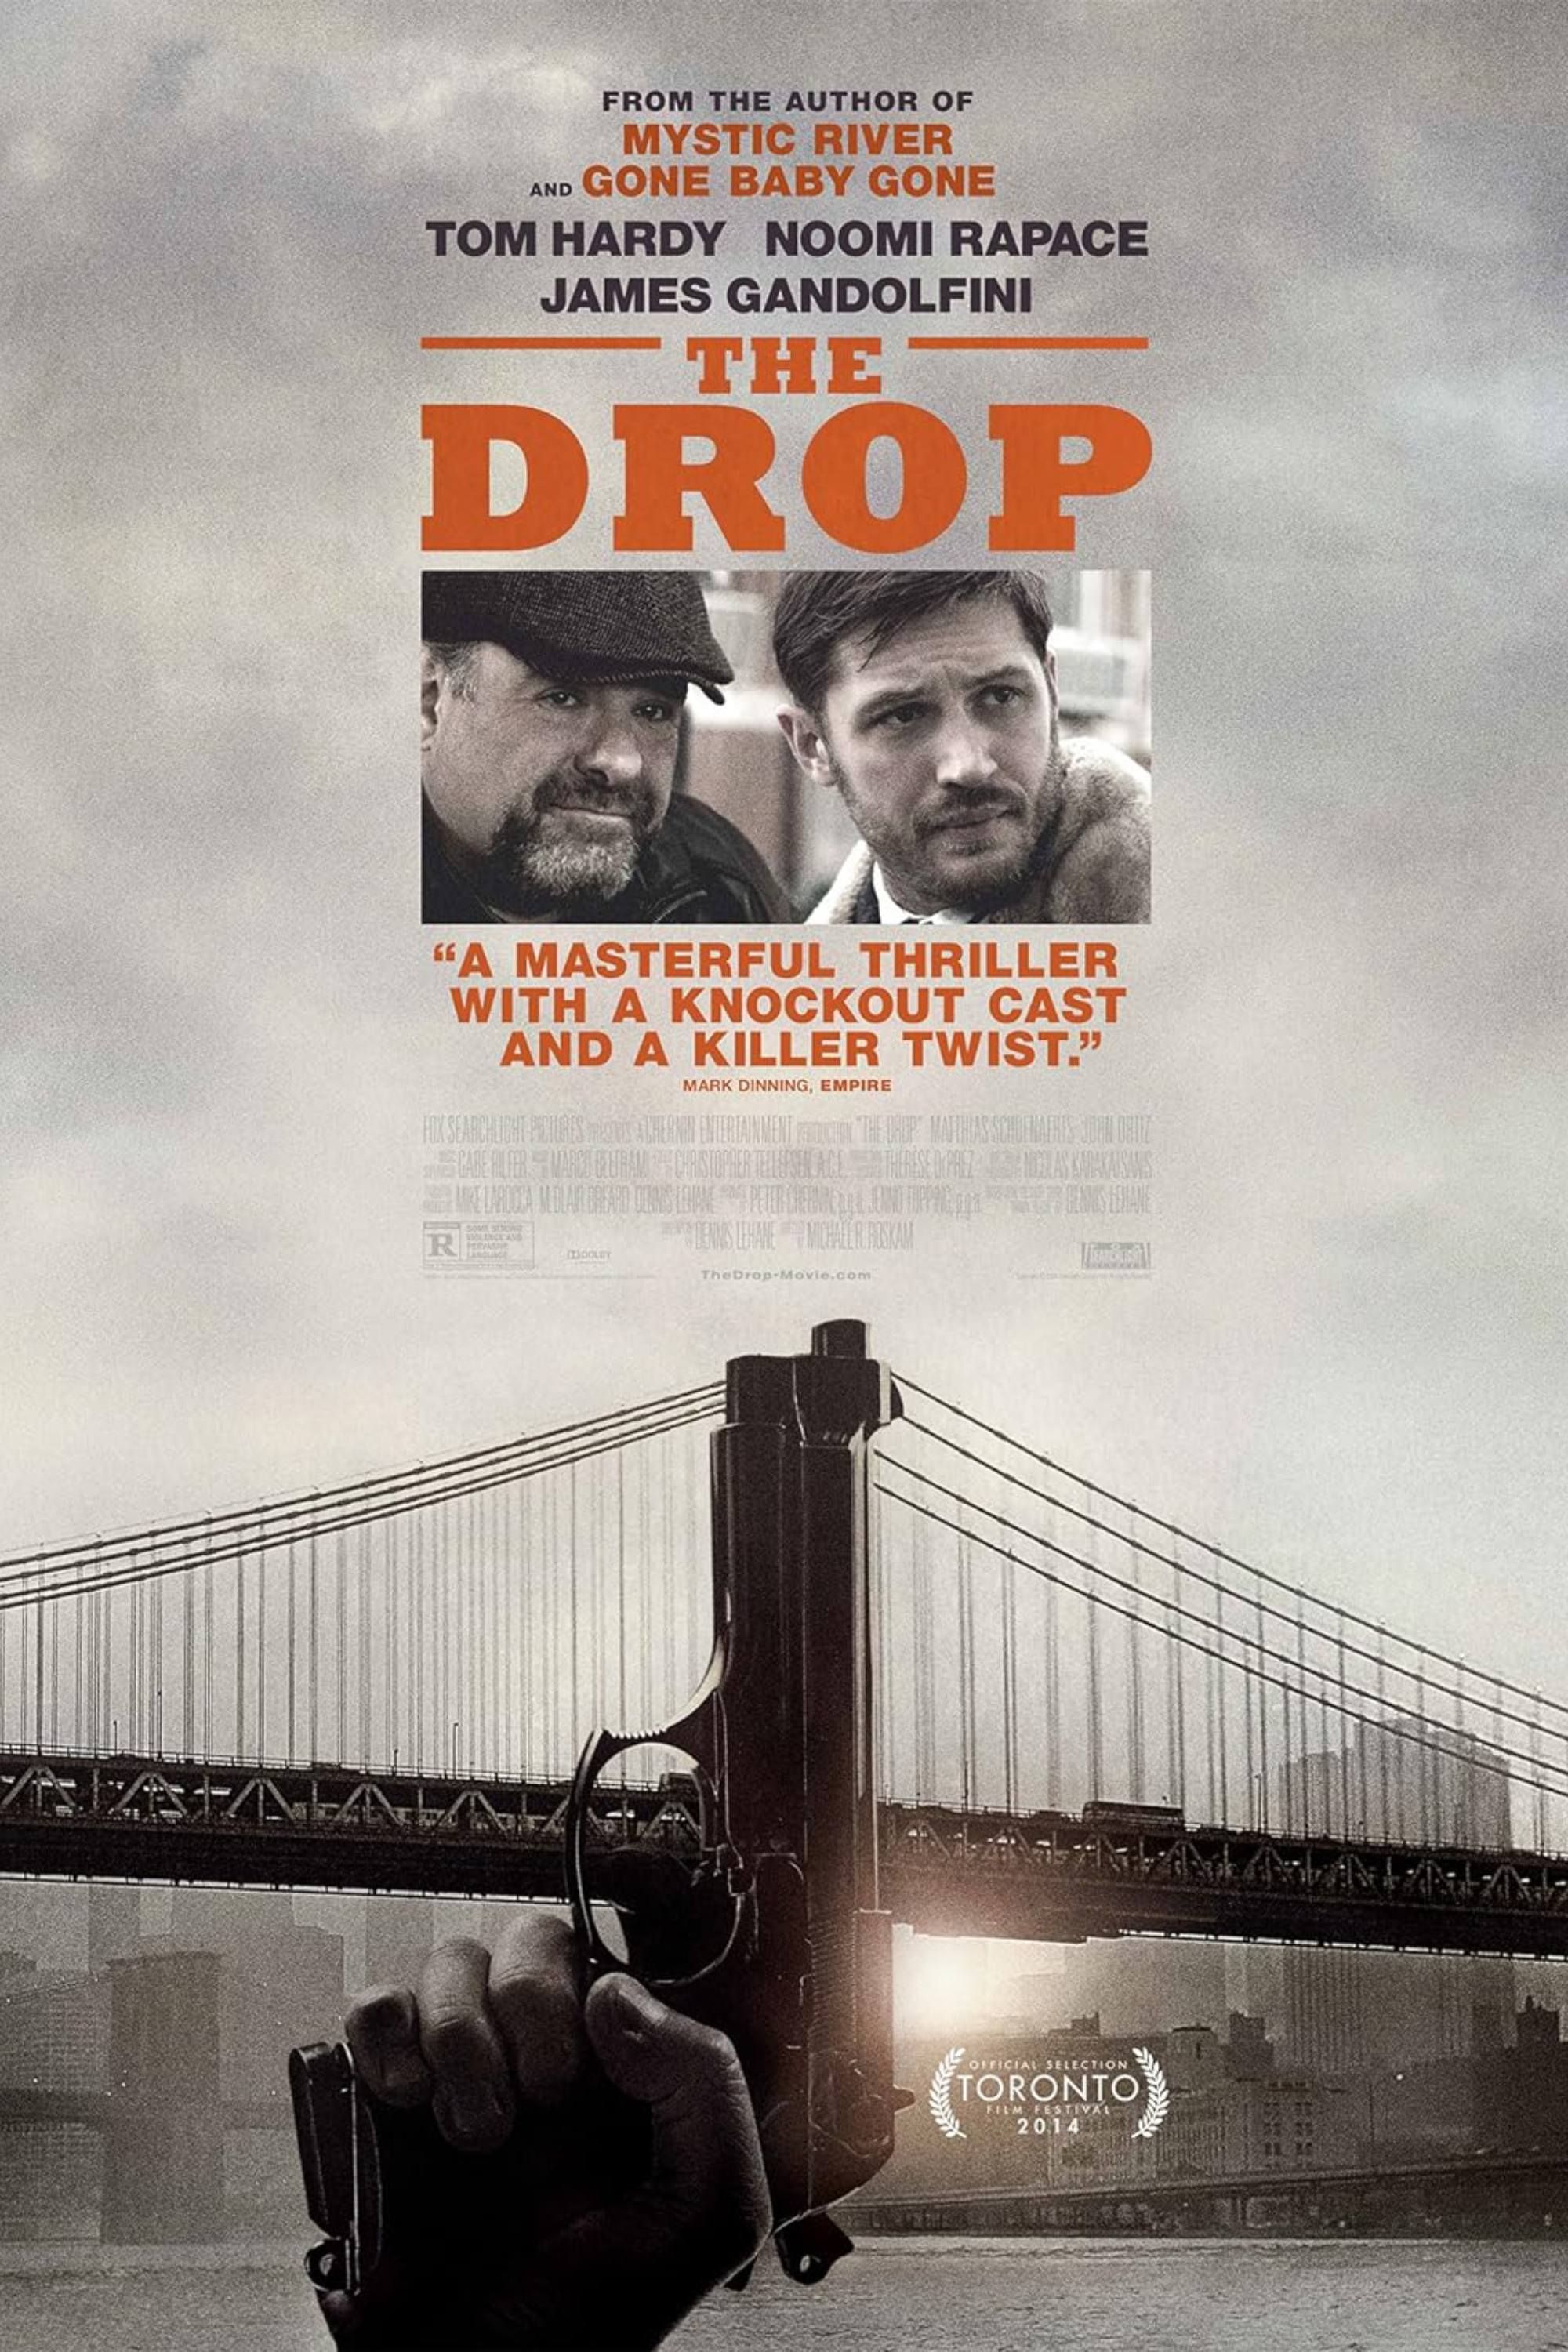 The Drop (2014) - Pôster - Tom Hardy e Noomi Rapace